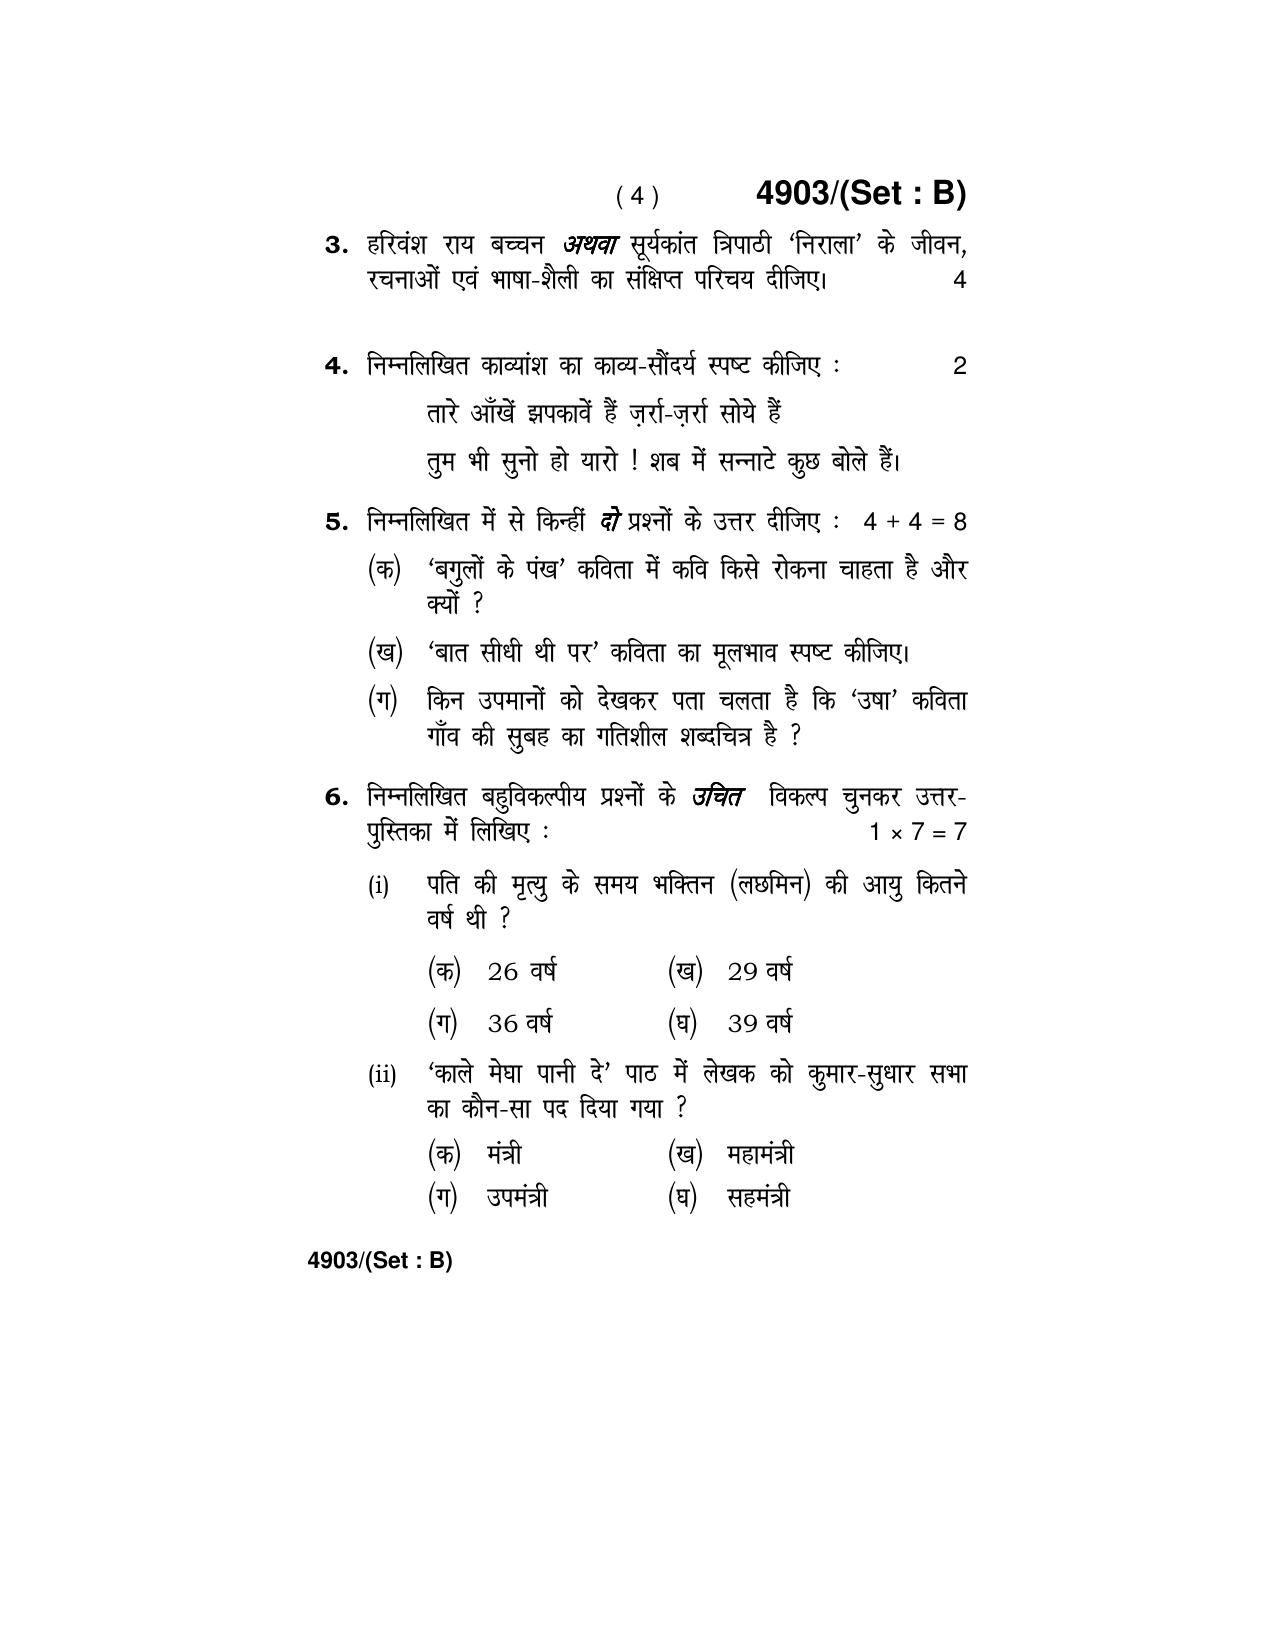 Haryana Board HBSE Class 12 Hindi Core 2020 Question Paper - Page 12